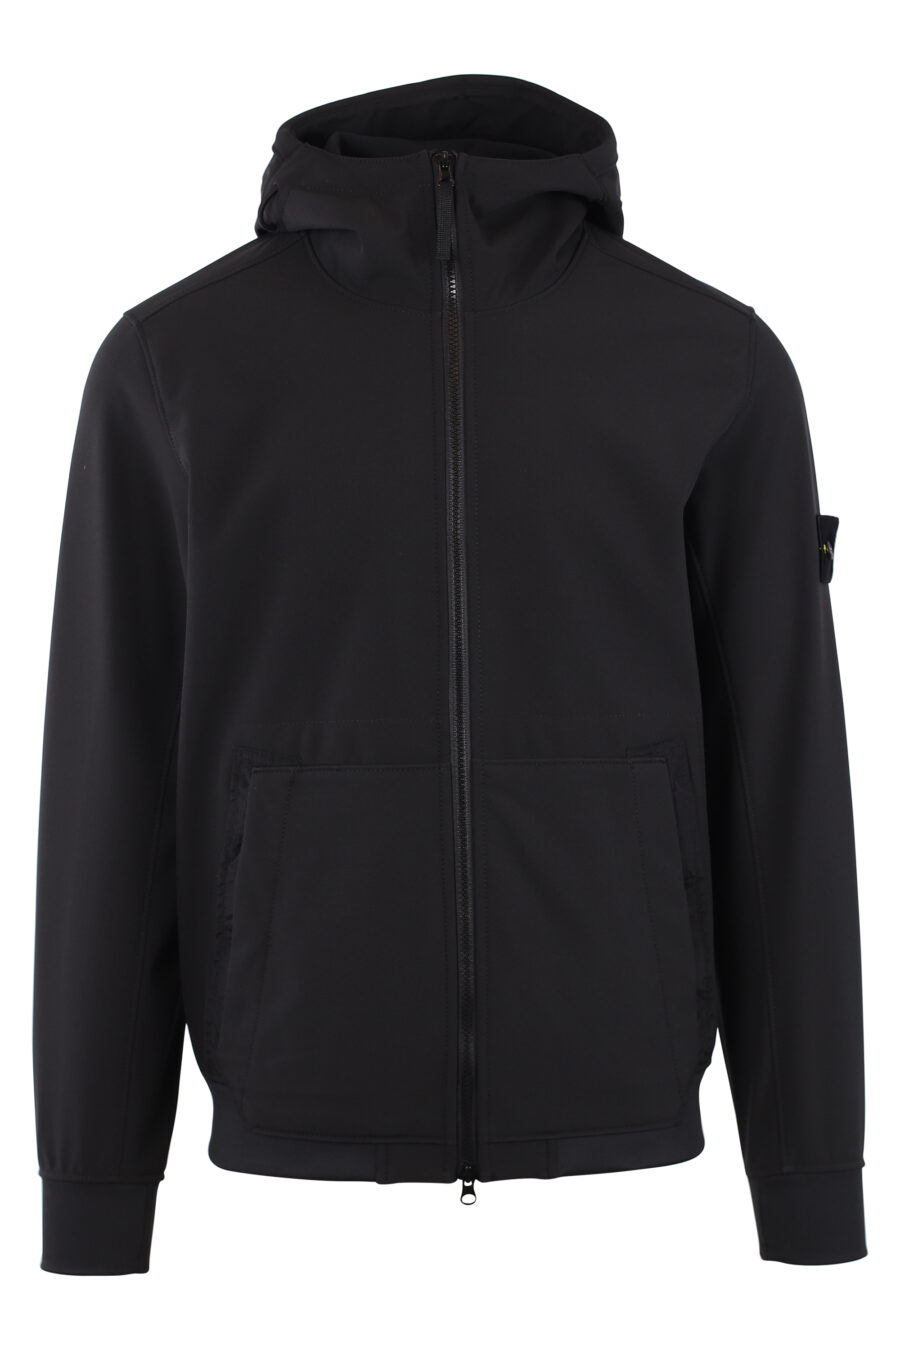 Black jacket with hood and logo patch - IMG 1504